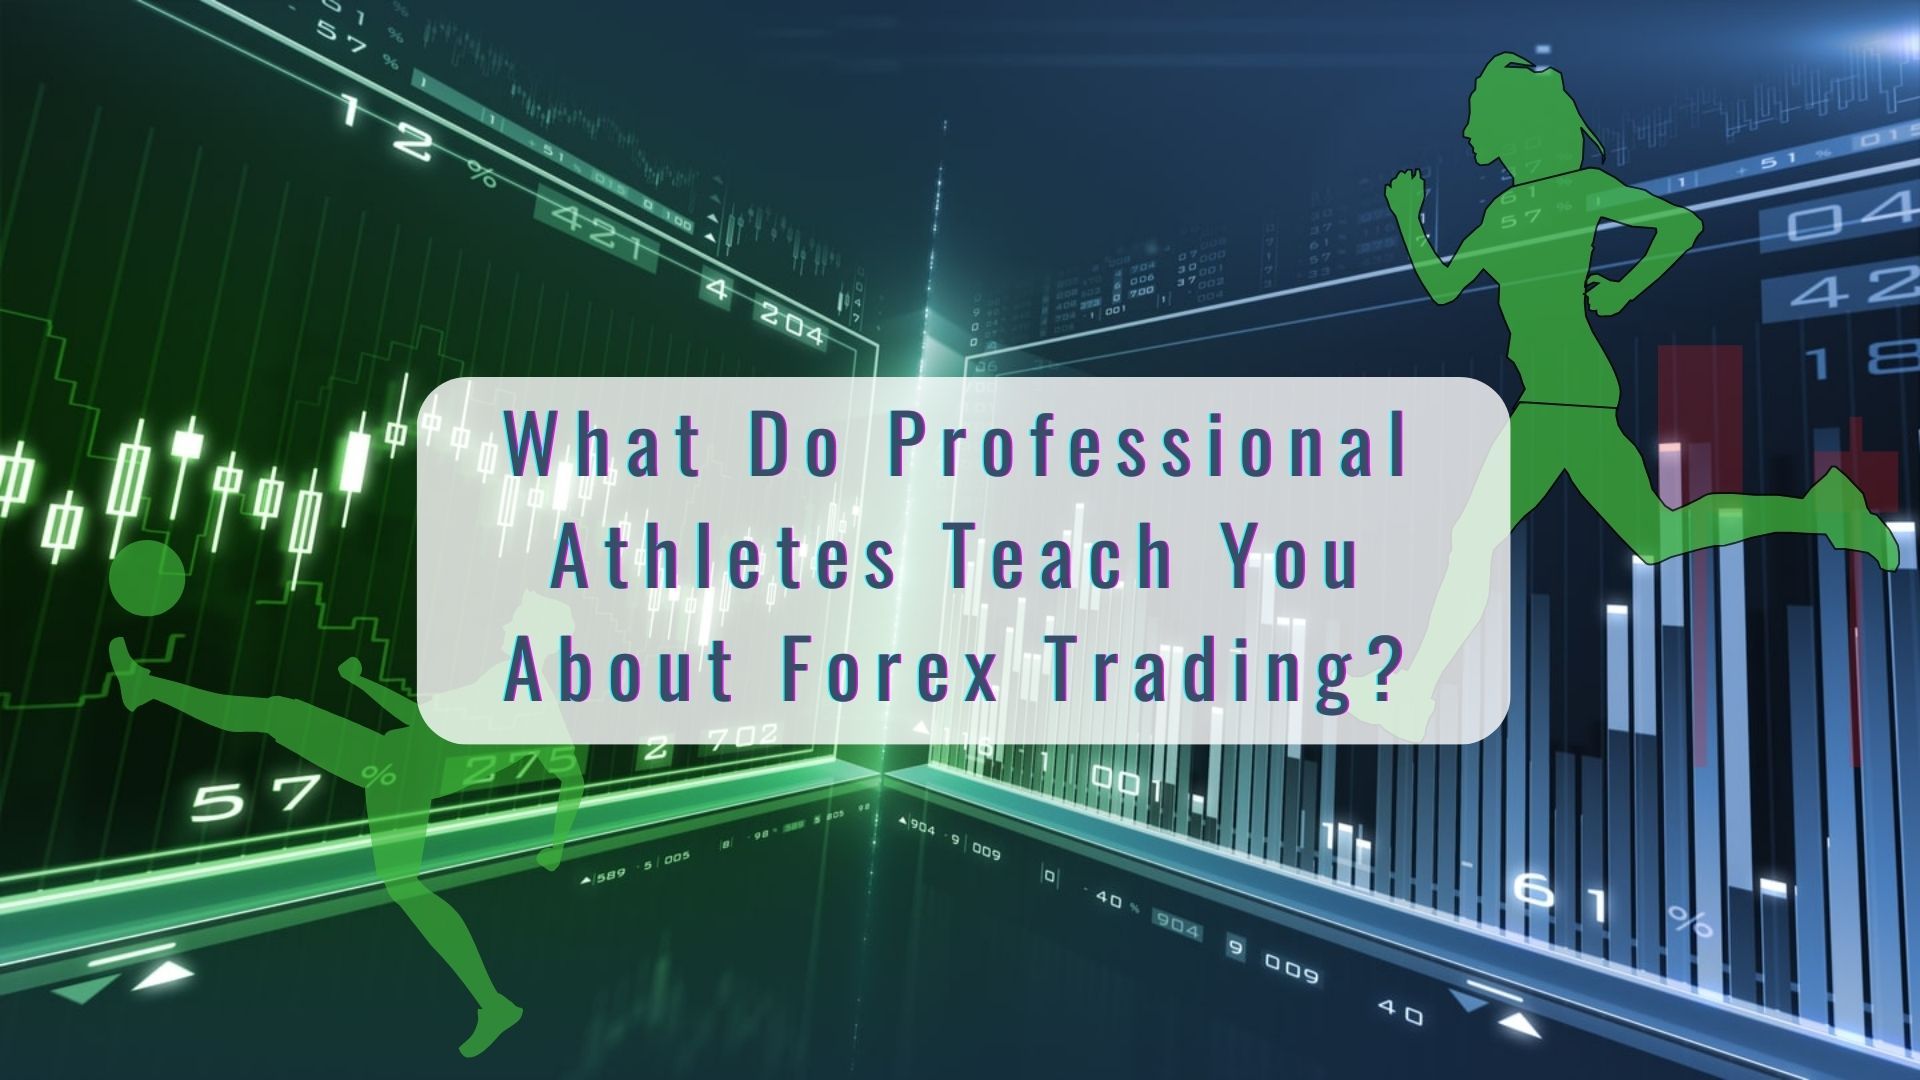 What Do Professional Athletes Teach You About Forex Trading?